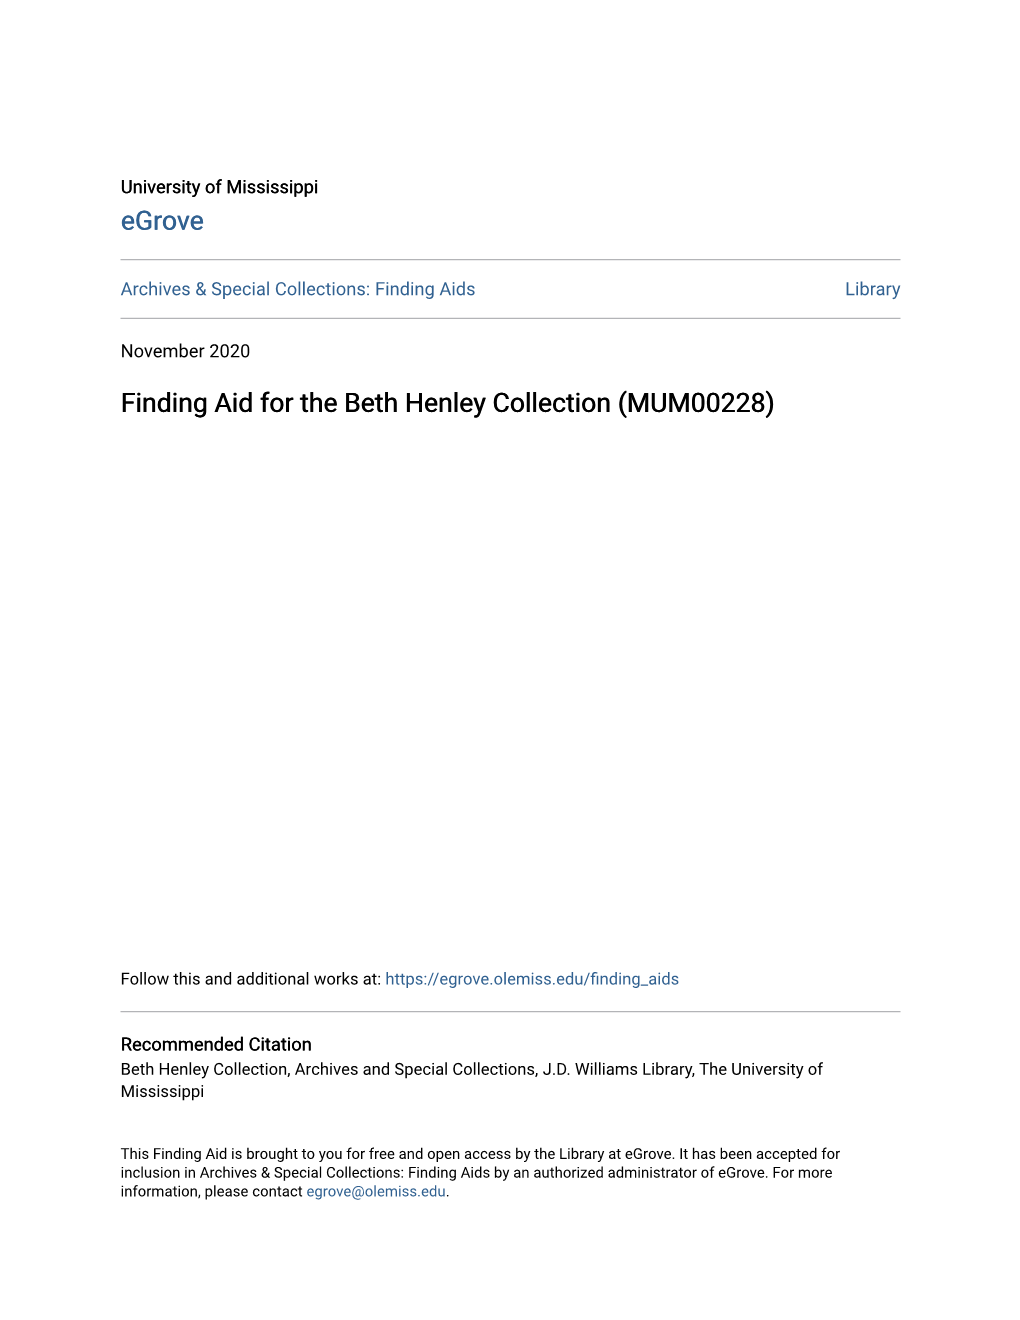 Finding Aid for the Beth Henley Collection (MUM00228)